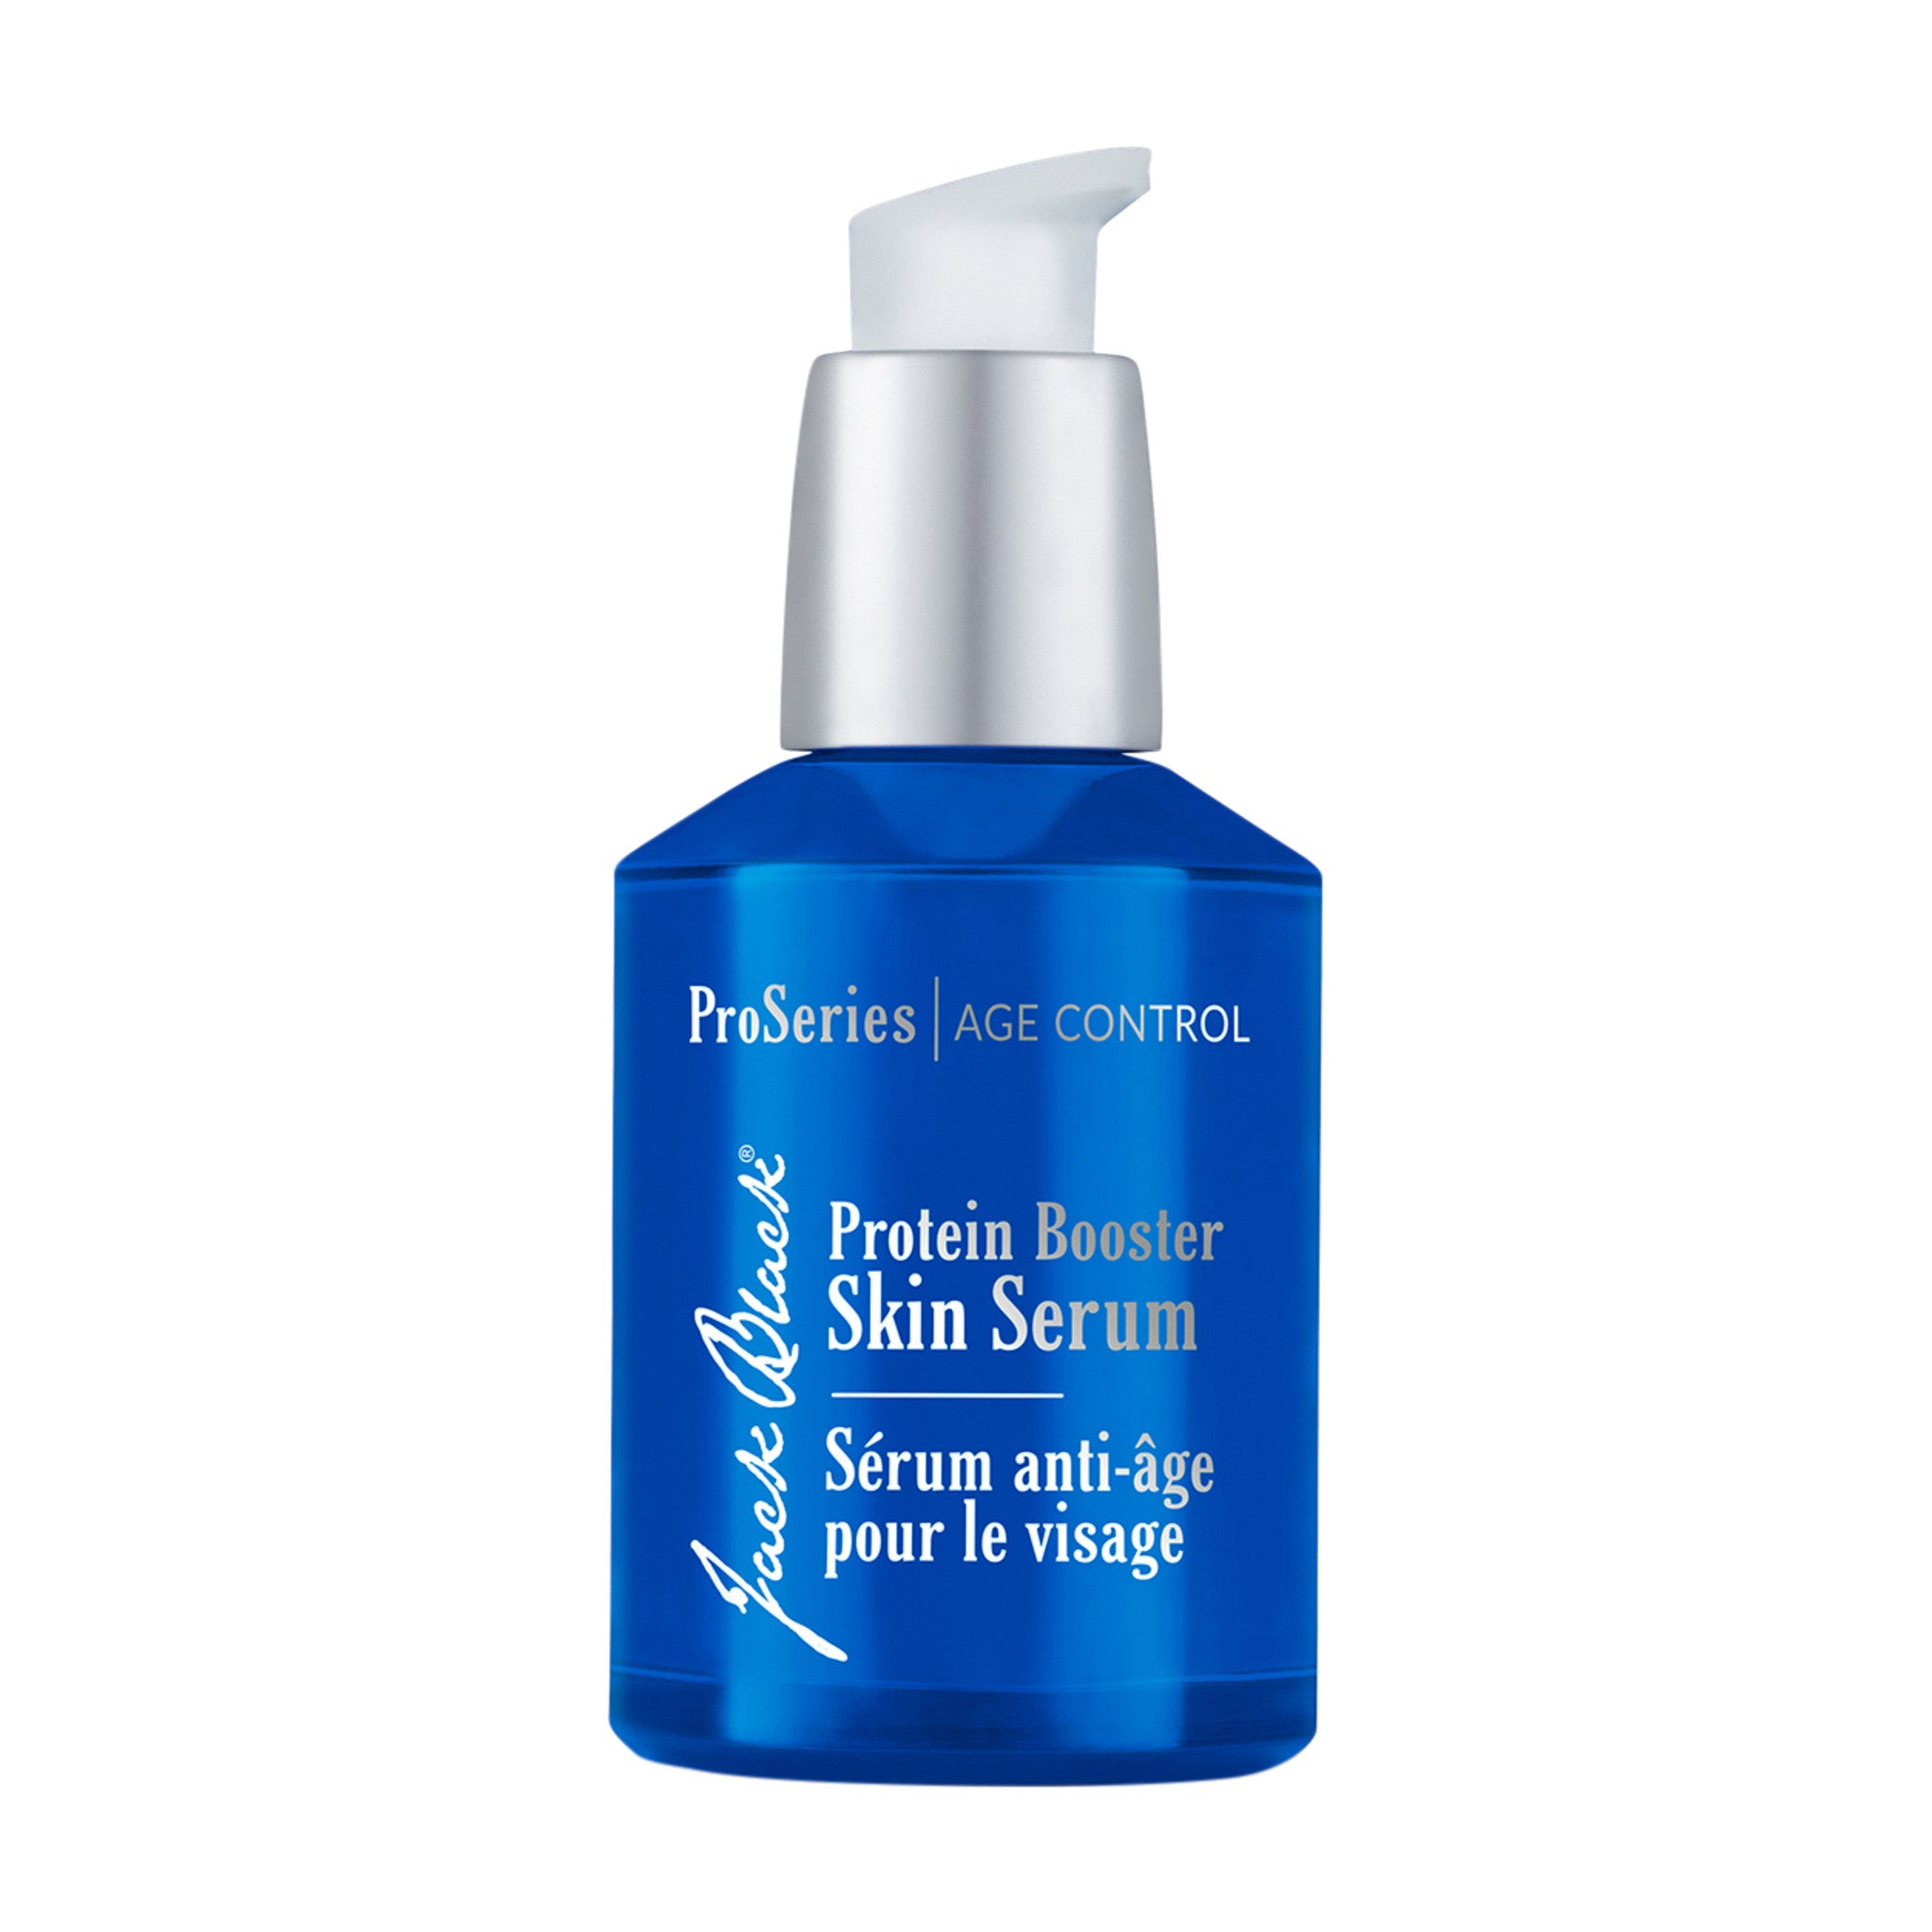 Protein Booster Face Serum main image.